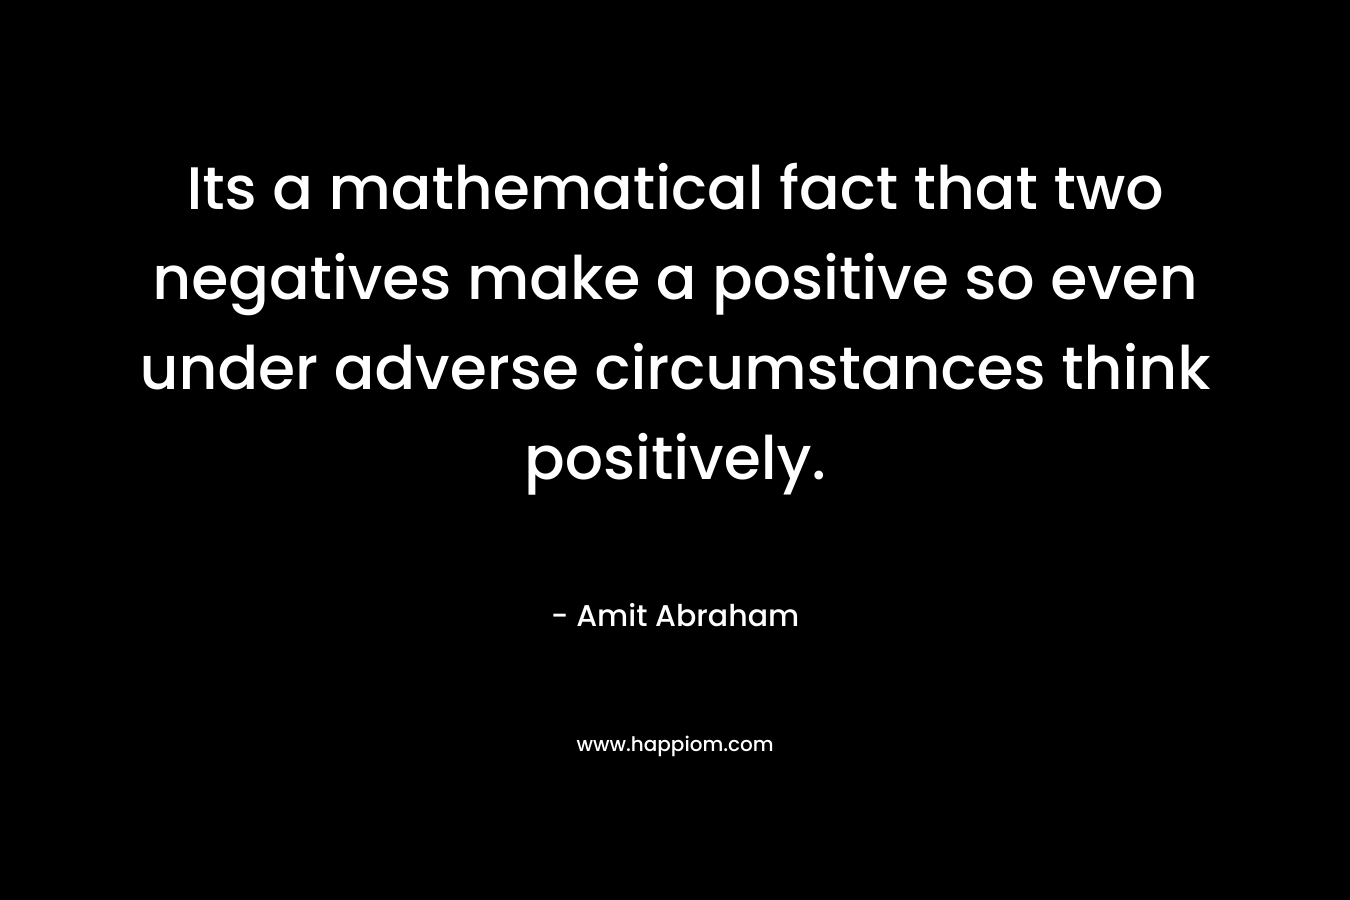 Its a mathematical fact that two negatives make a positive so even under adverse circumstances think positively. – Amit Abraham